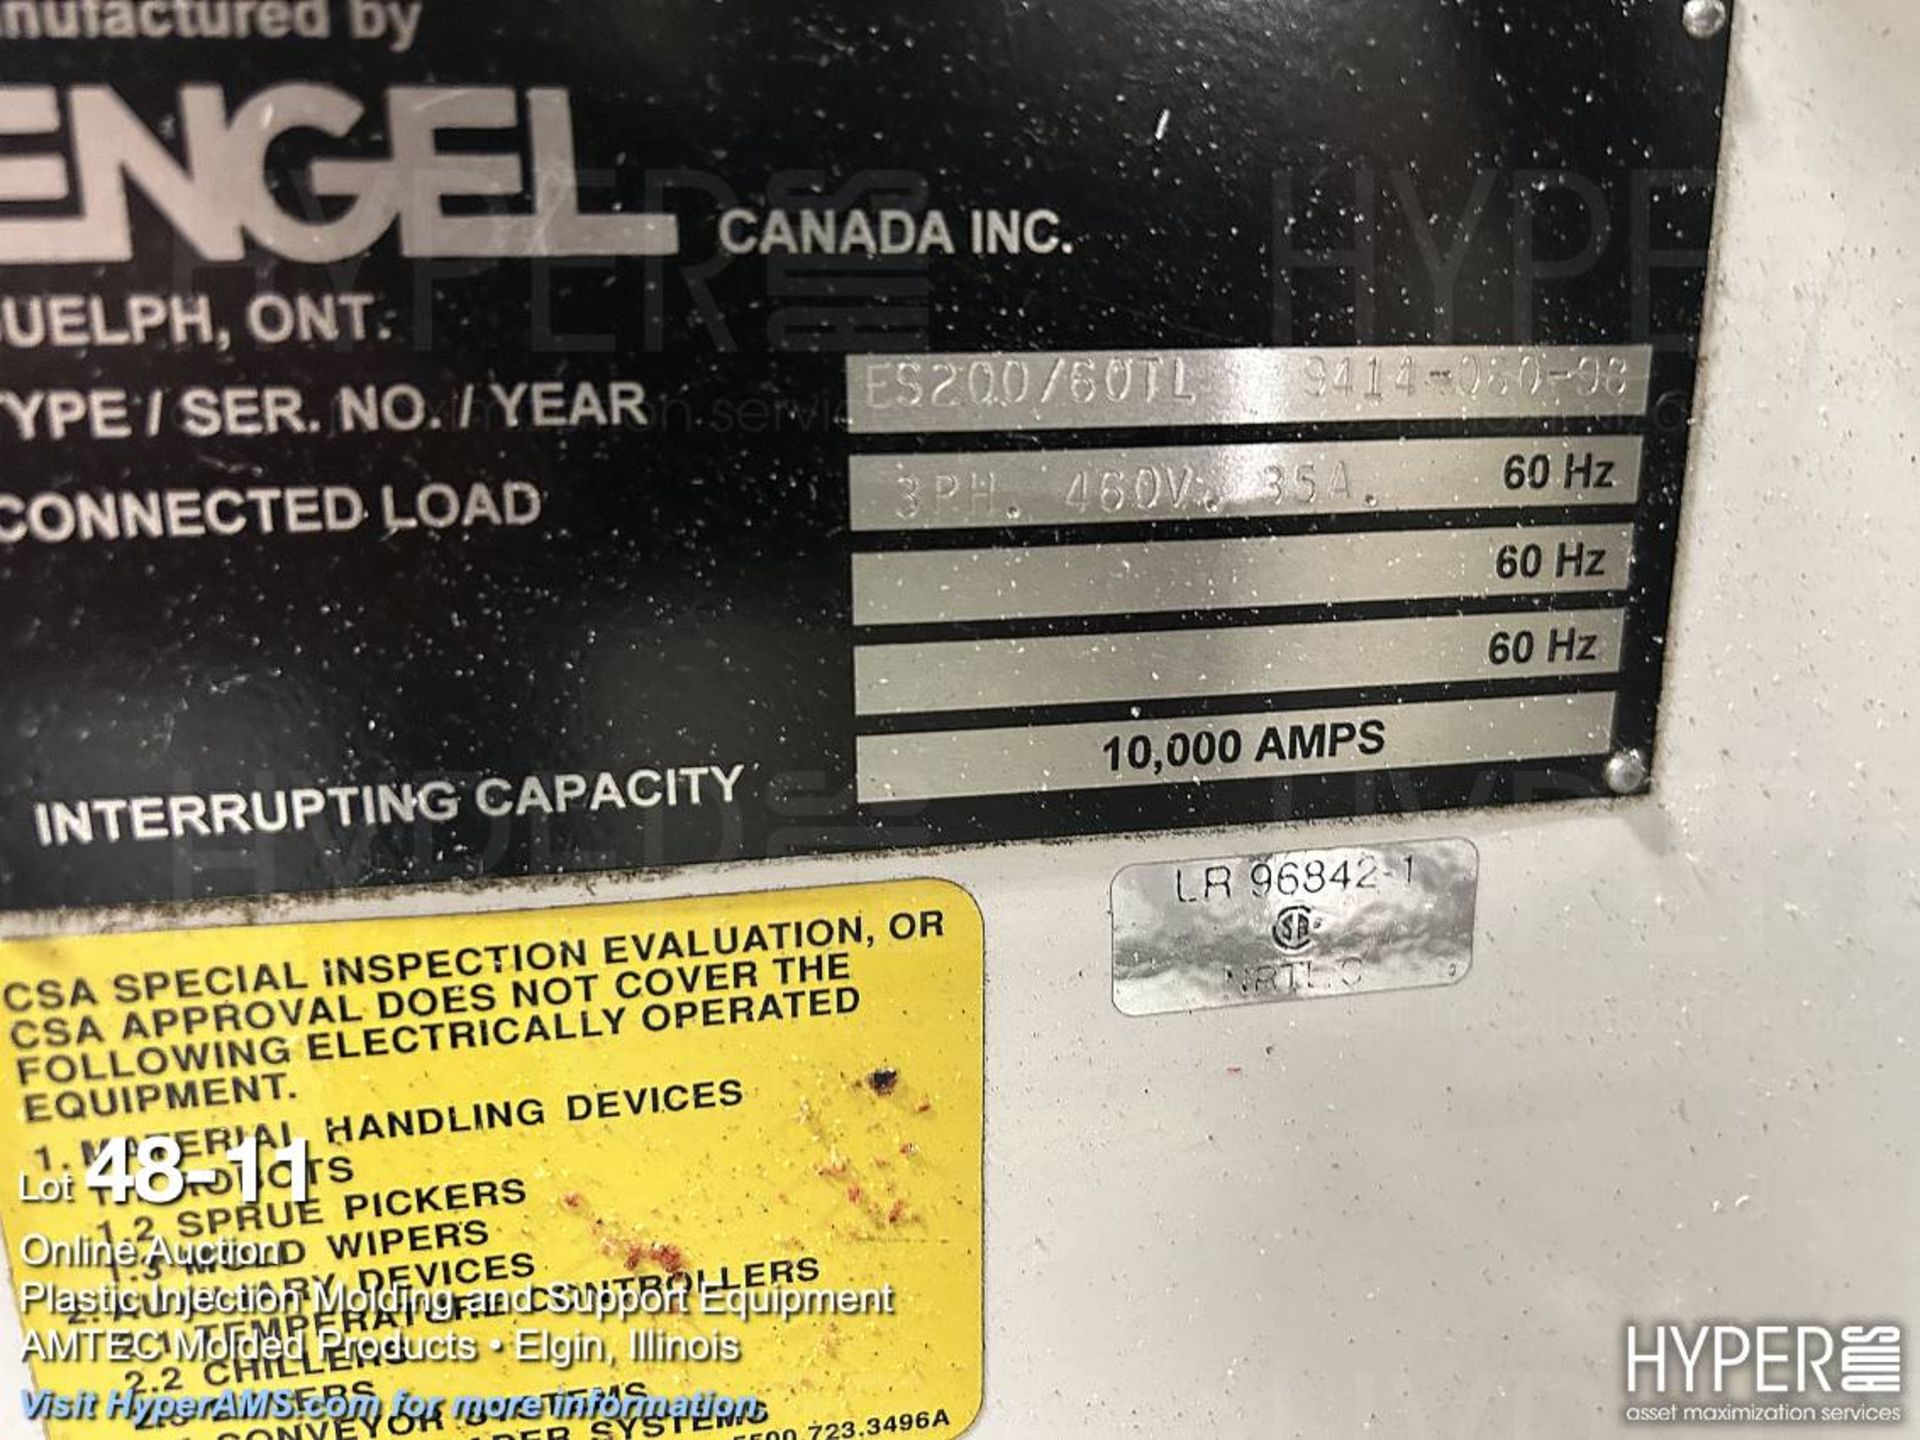 Engel ES200/60TL toggle clamp plastic injection molding machine - Image 11 of 16